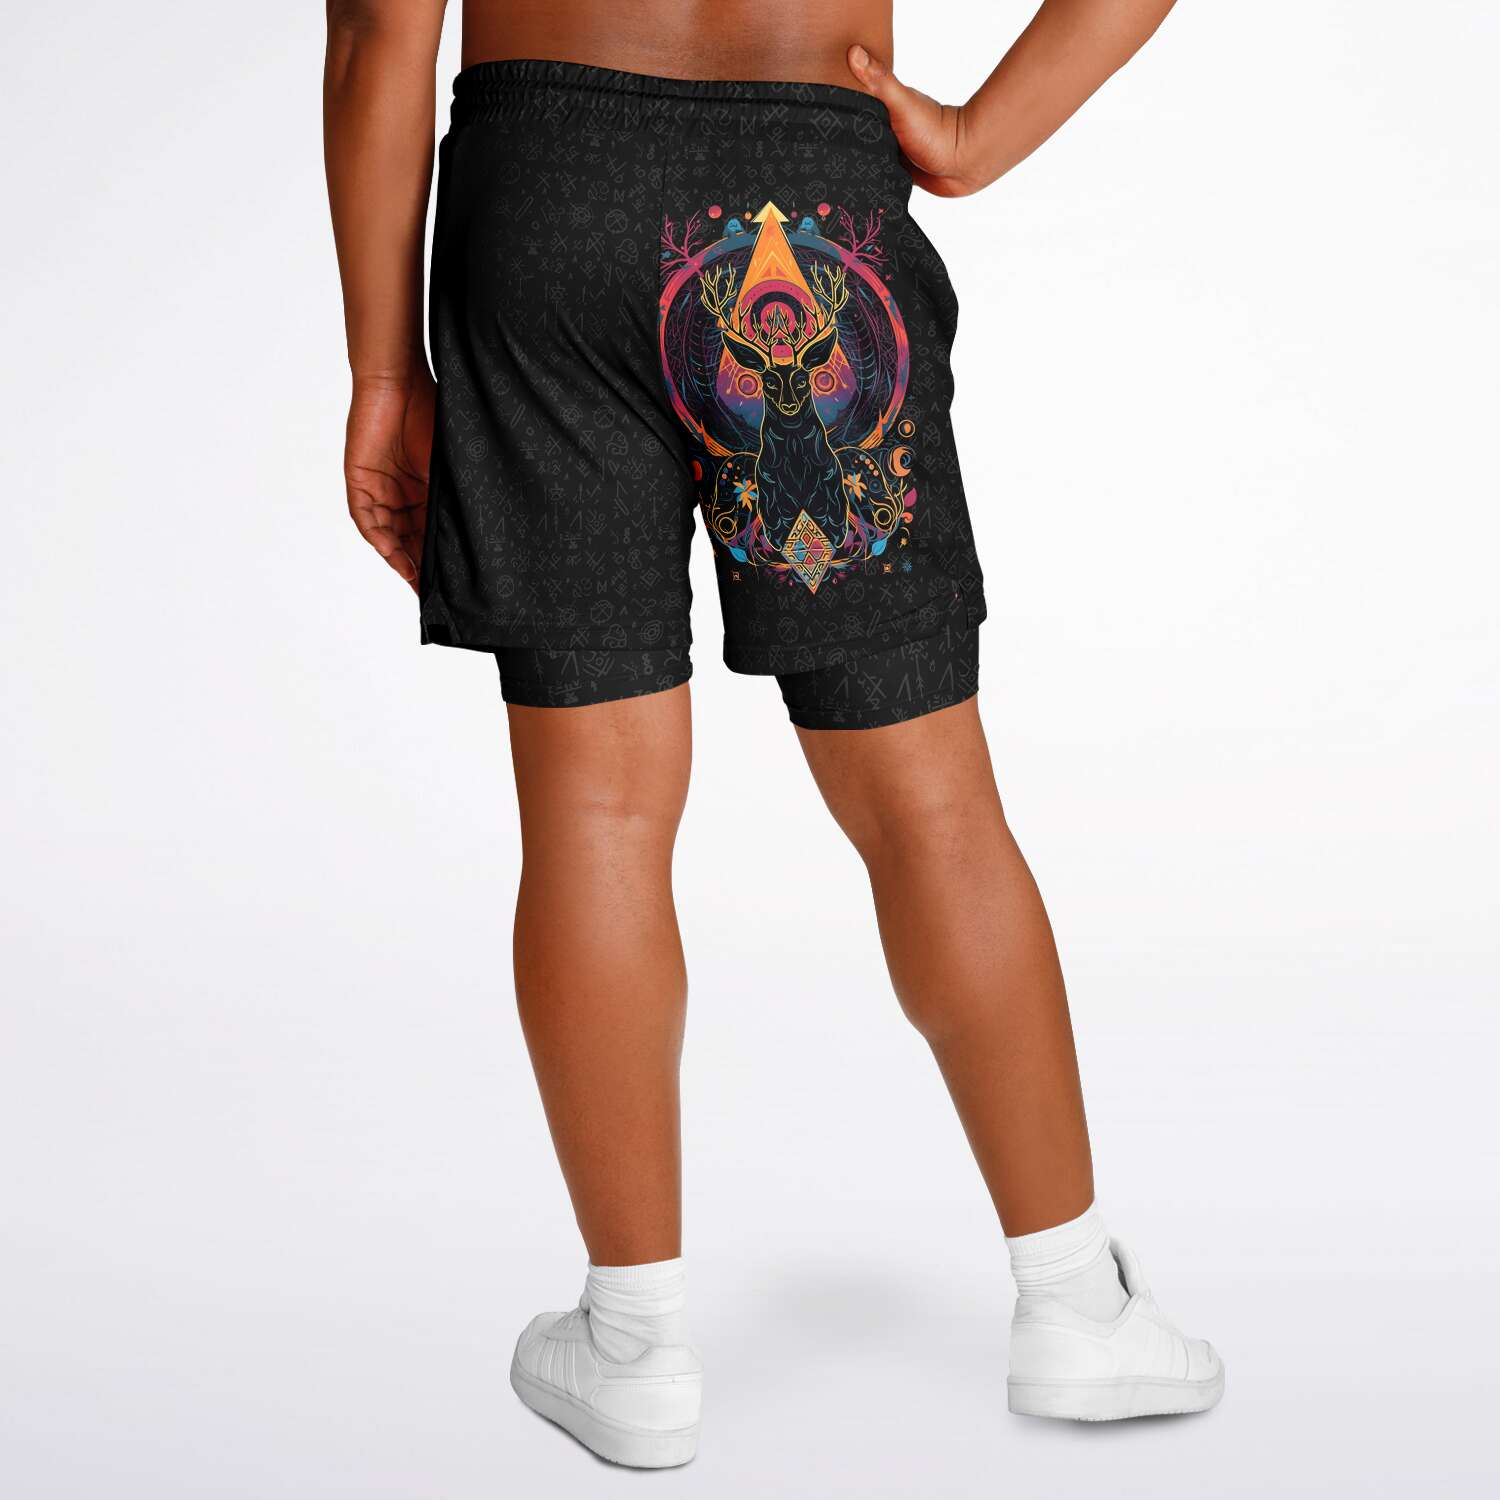 Lupine Dreams 2 in 1 shorts - Redwolf Jersey Works